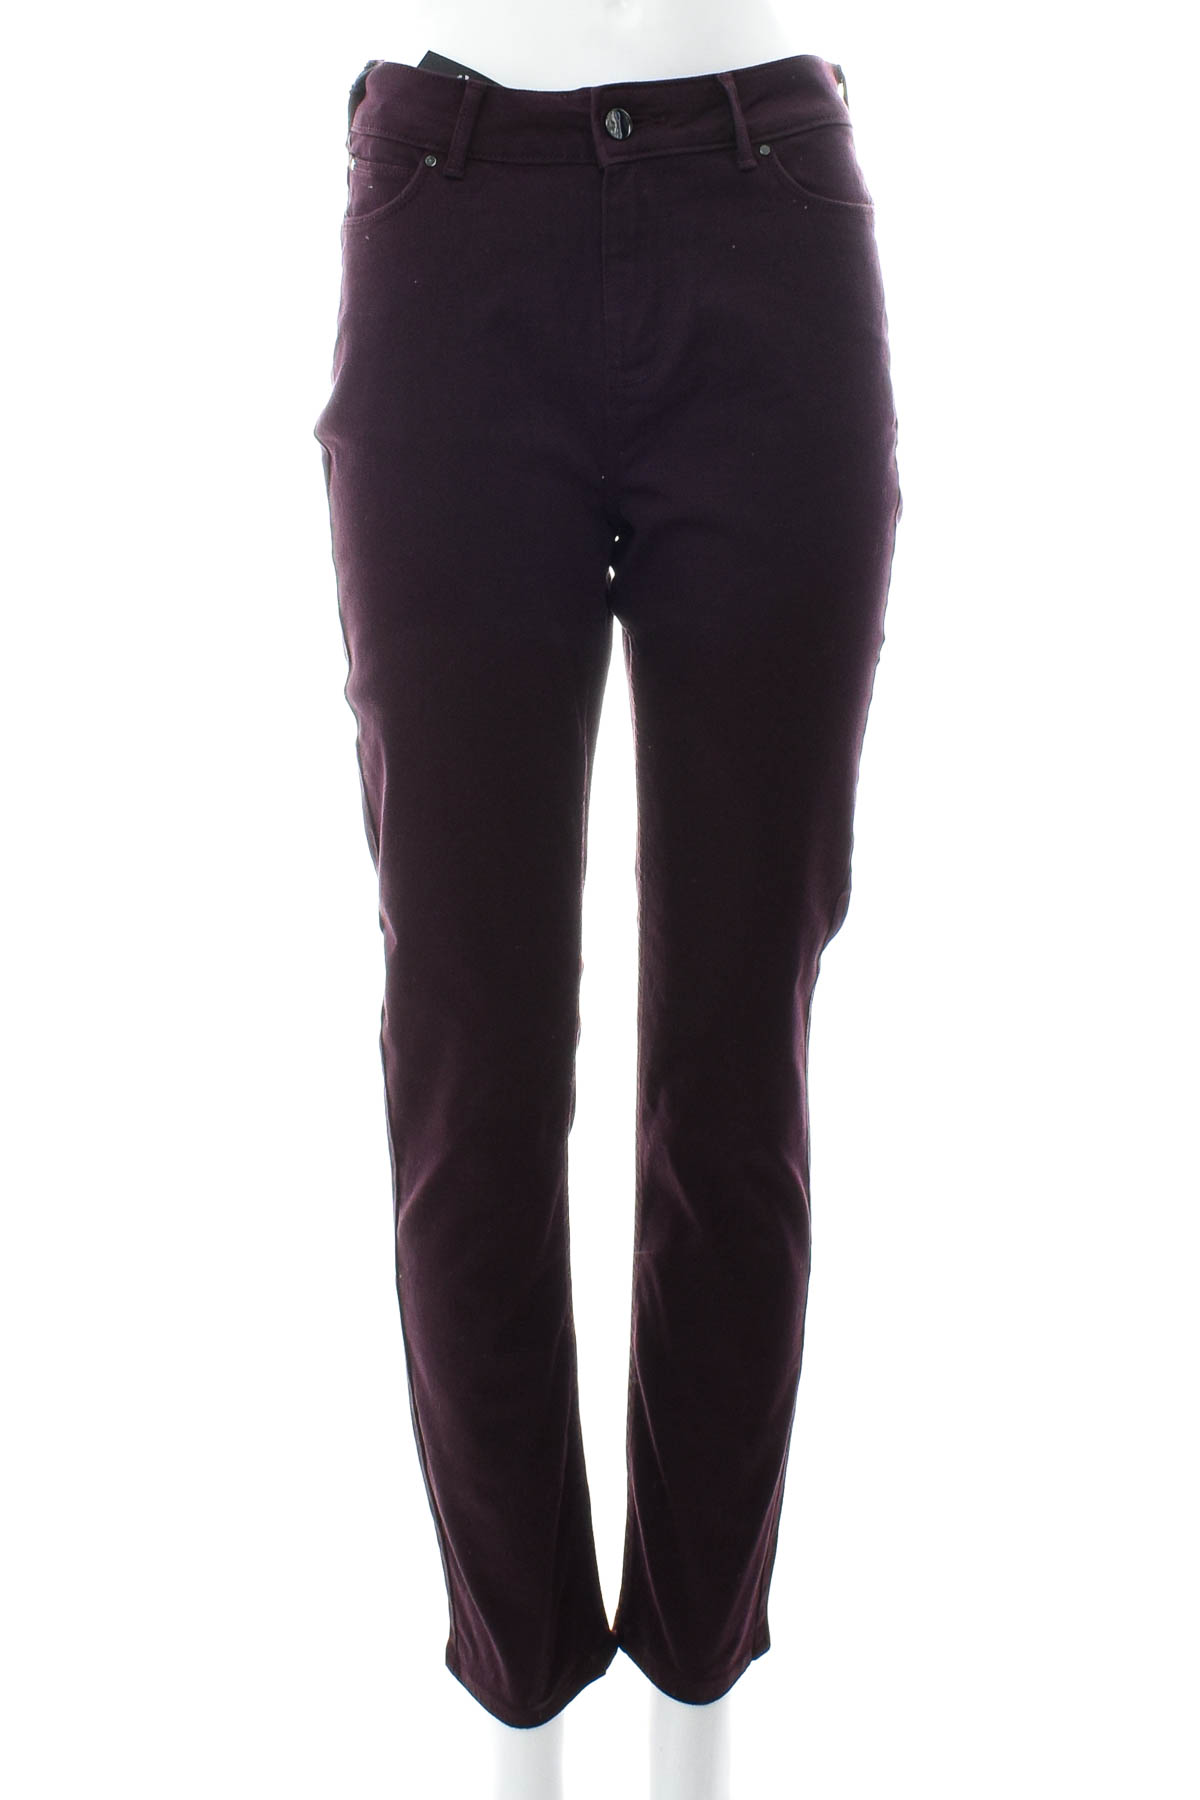 Women's trousers - Dunnes Stores - 0